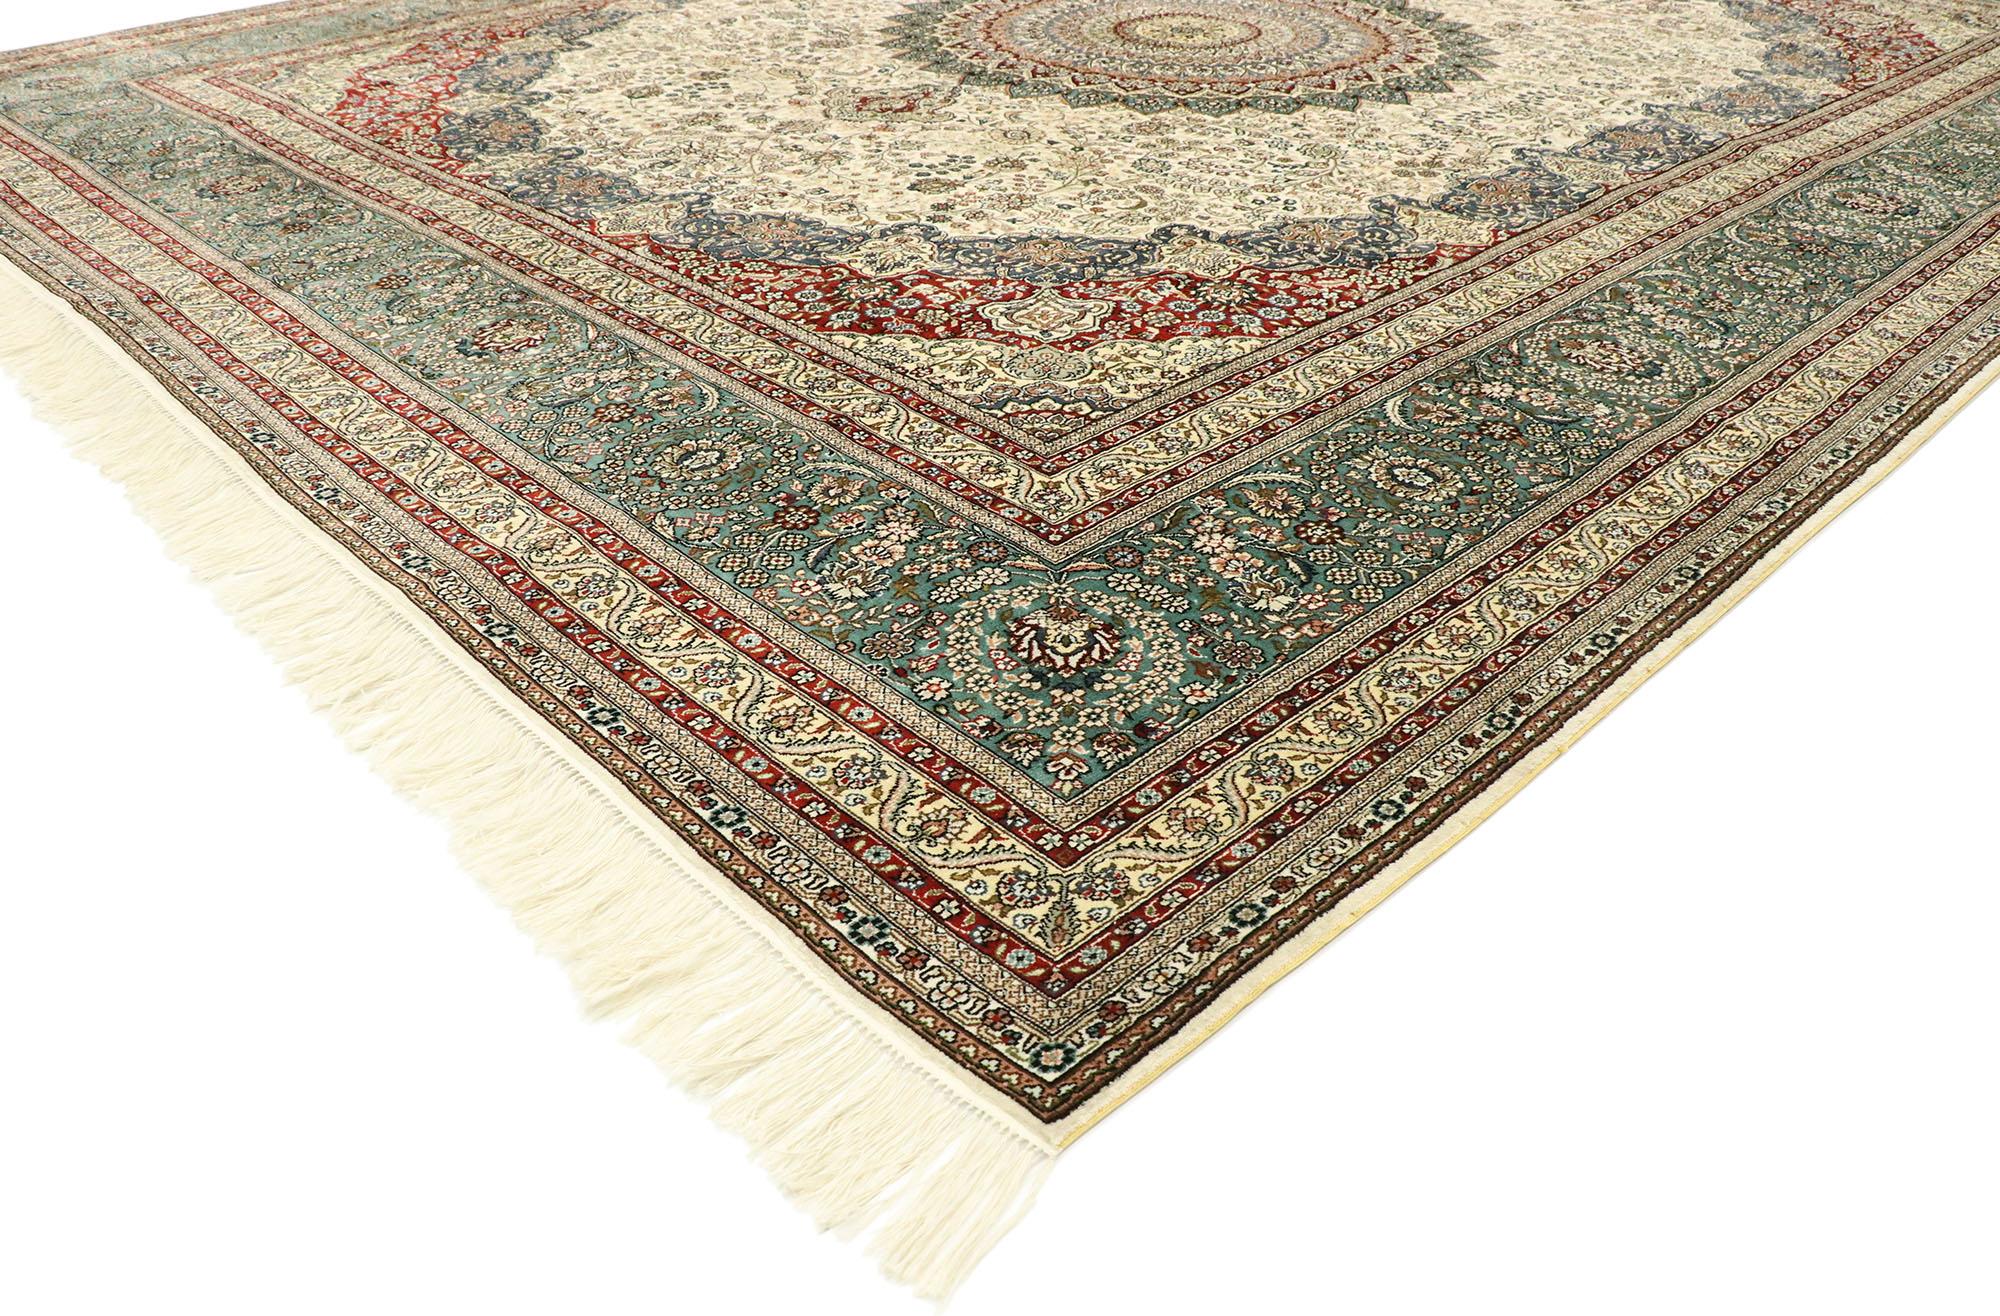 77506, vintage Turkish silk Hereke rug with Arabesque Art Nouveau Rococo style. With ornate details and well-balanced symmetry combined with a tranquil color palette, this hand-knotted silk vintage Turkish Hereke rug beautifully embodies both Art